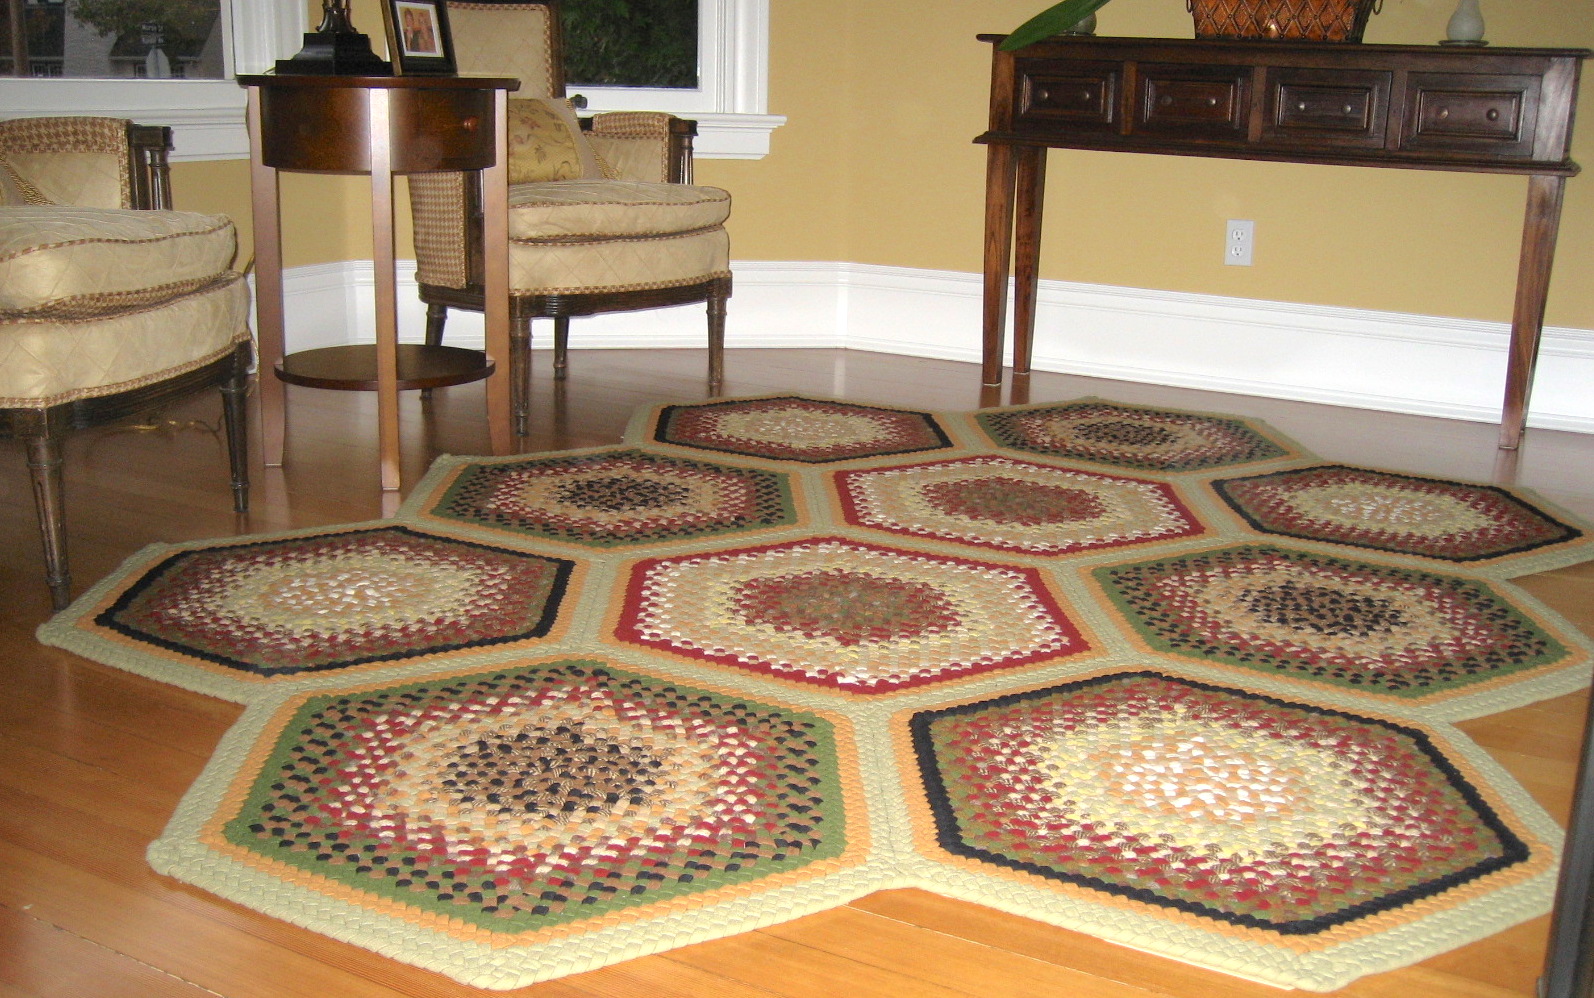 Cotton Braided Rugs – Classic Americana in Your Home